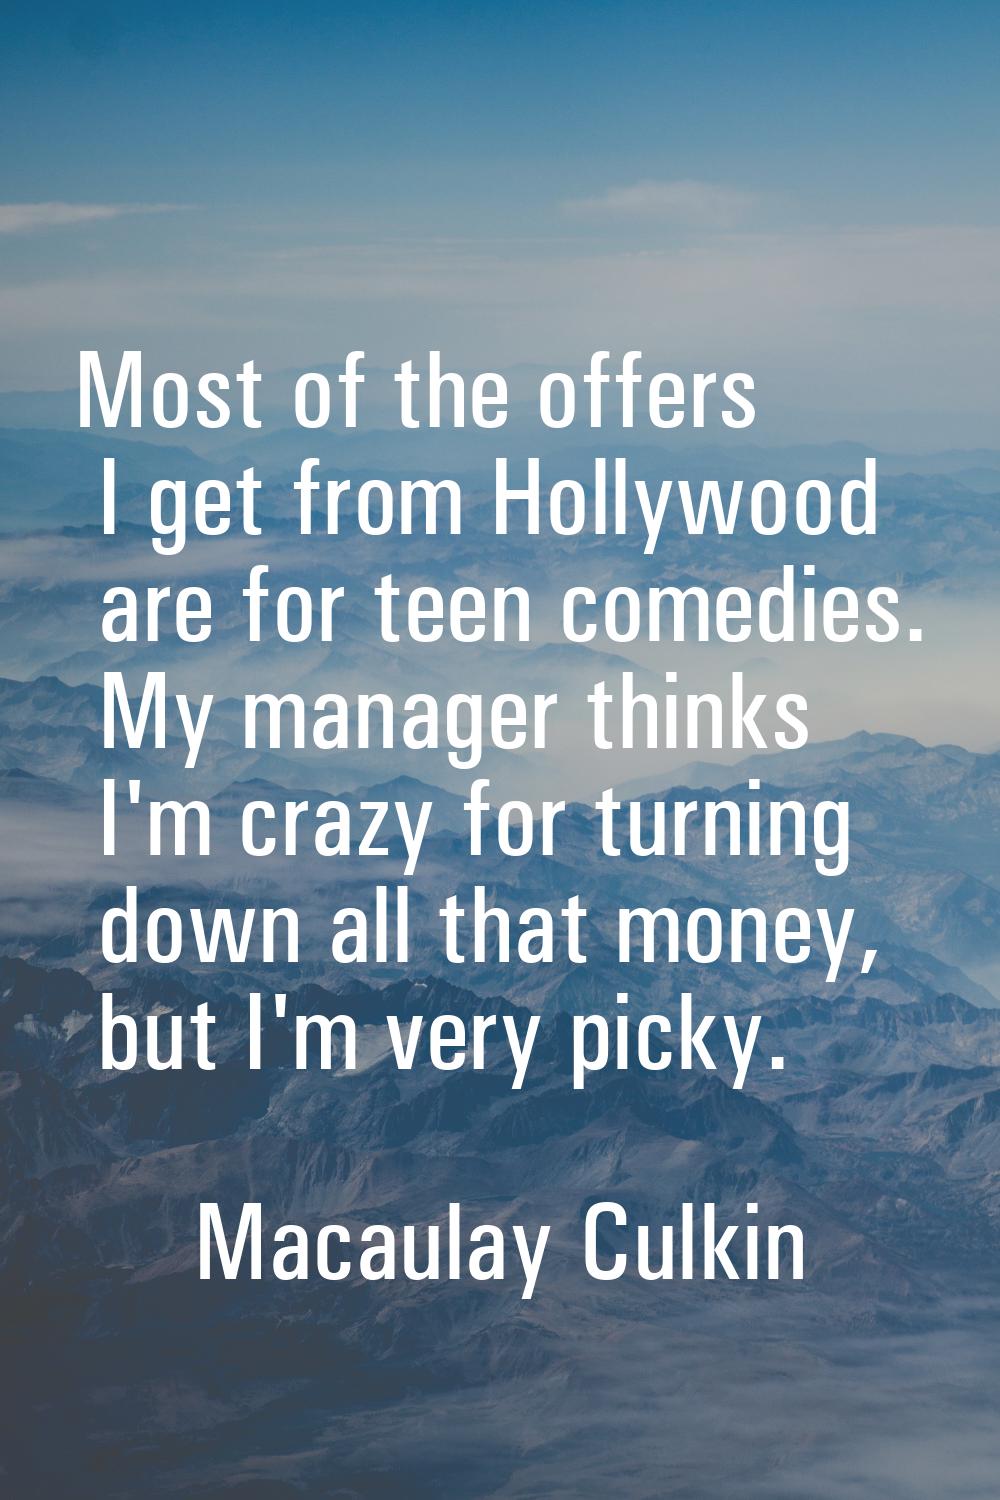 Most of the offers I get from Hollywood are for teen comedies. My manager thinks I'm crazy for turn